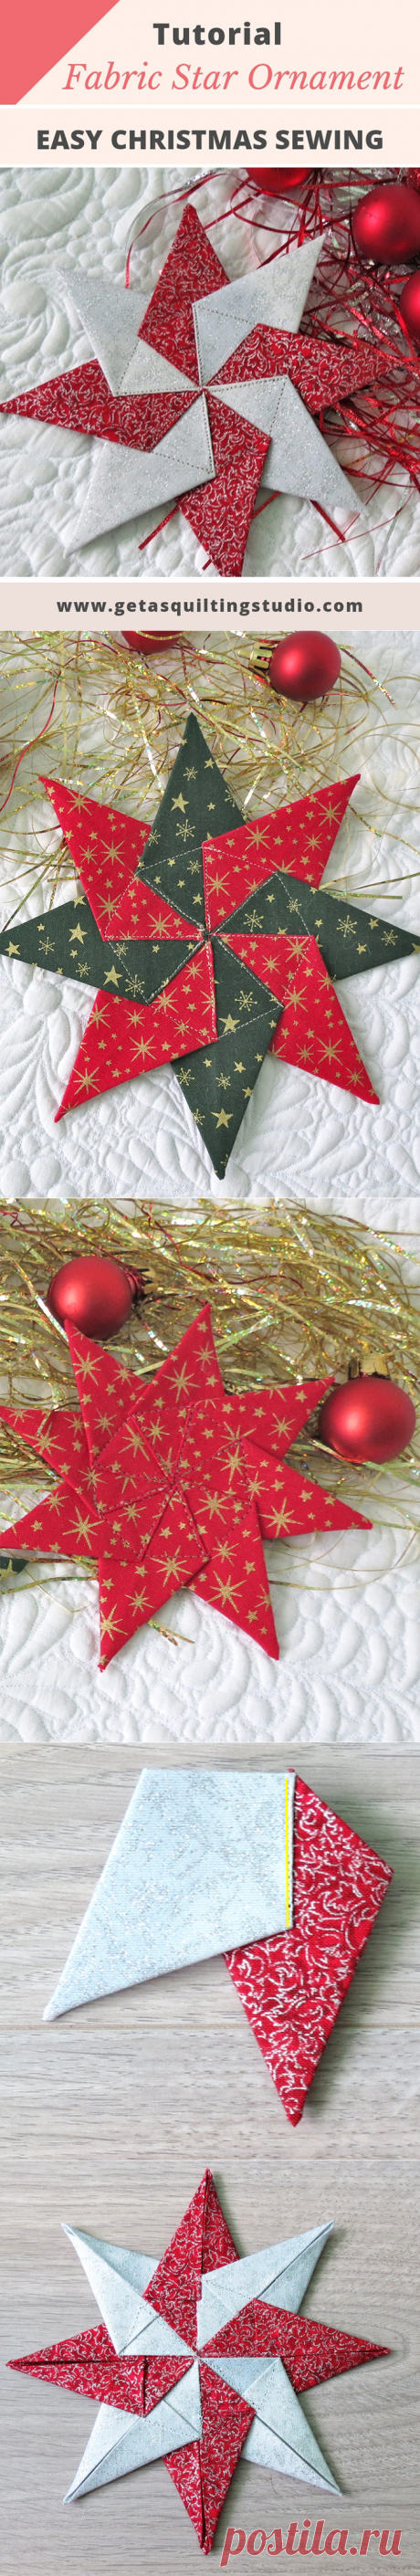 Fabric Star Ornament- tutorial for easy Christmas sewing - Geta's Quilting Studio